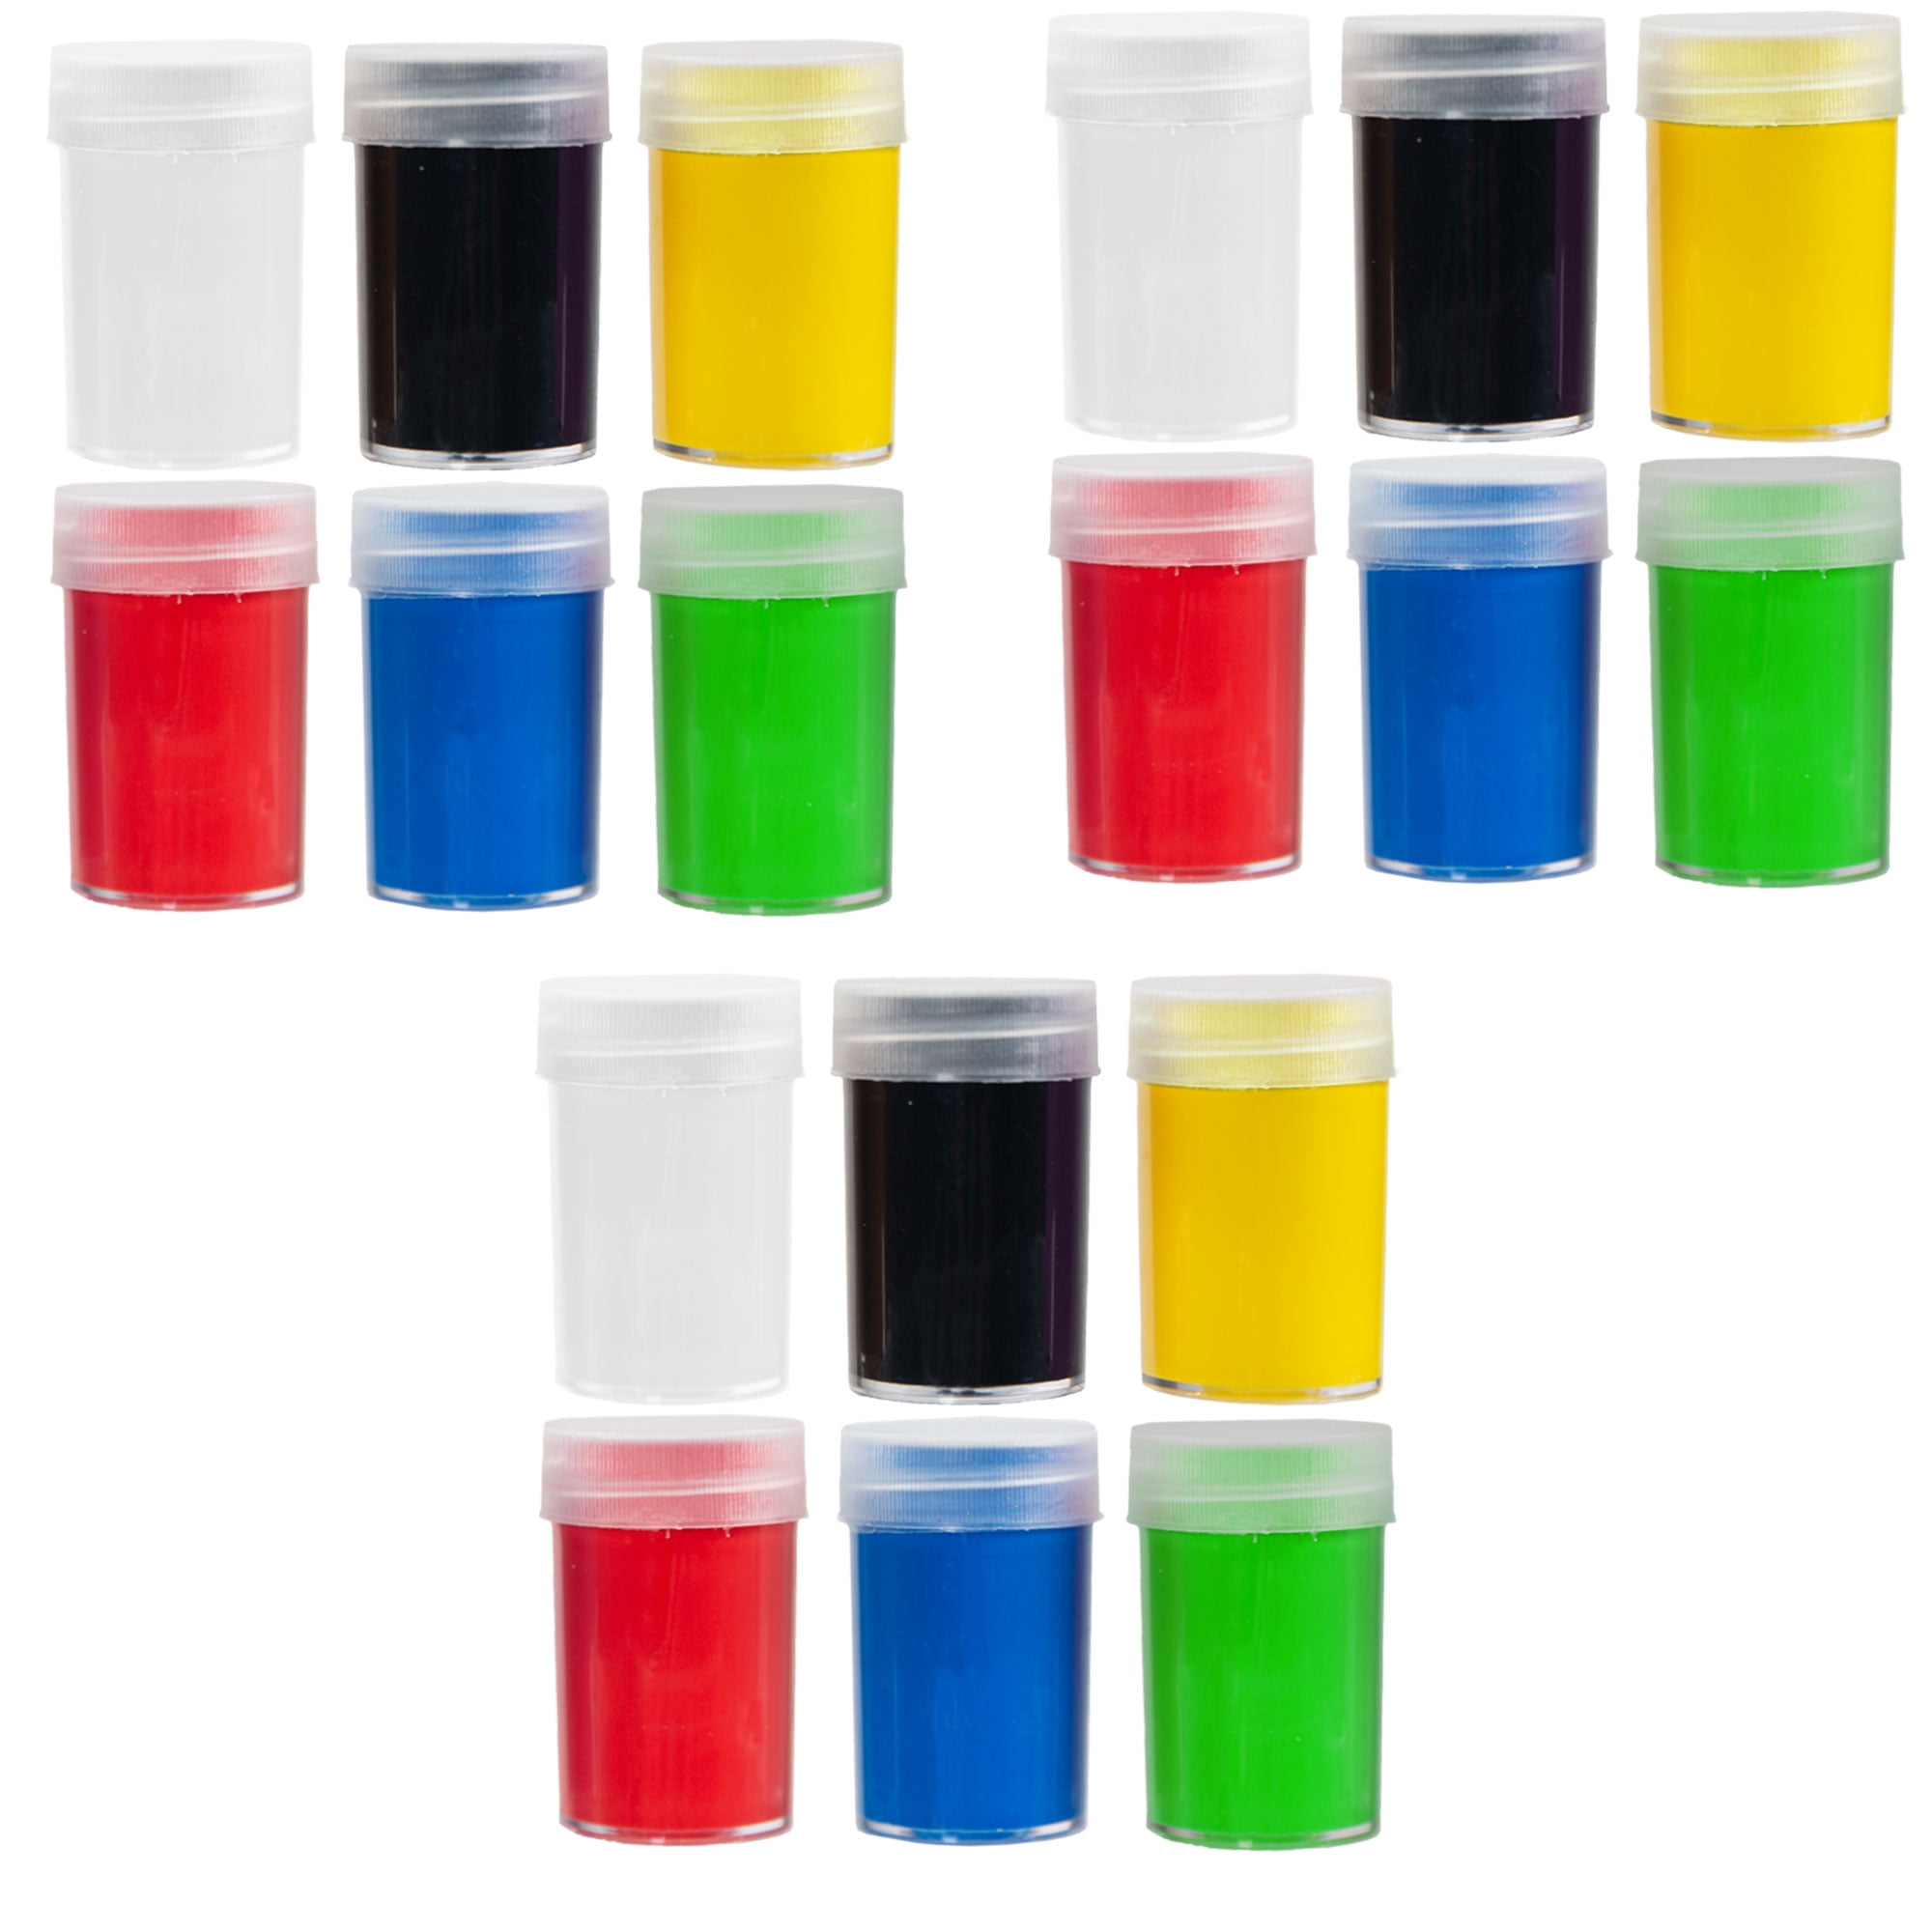 New Hello Hobby Primary Acrylic Paint Jars, 6 Primary Colors sip